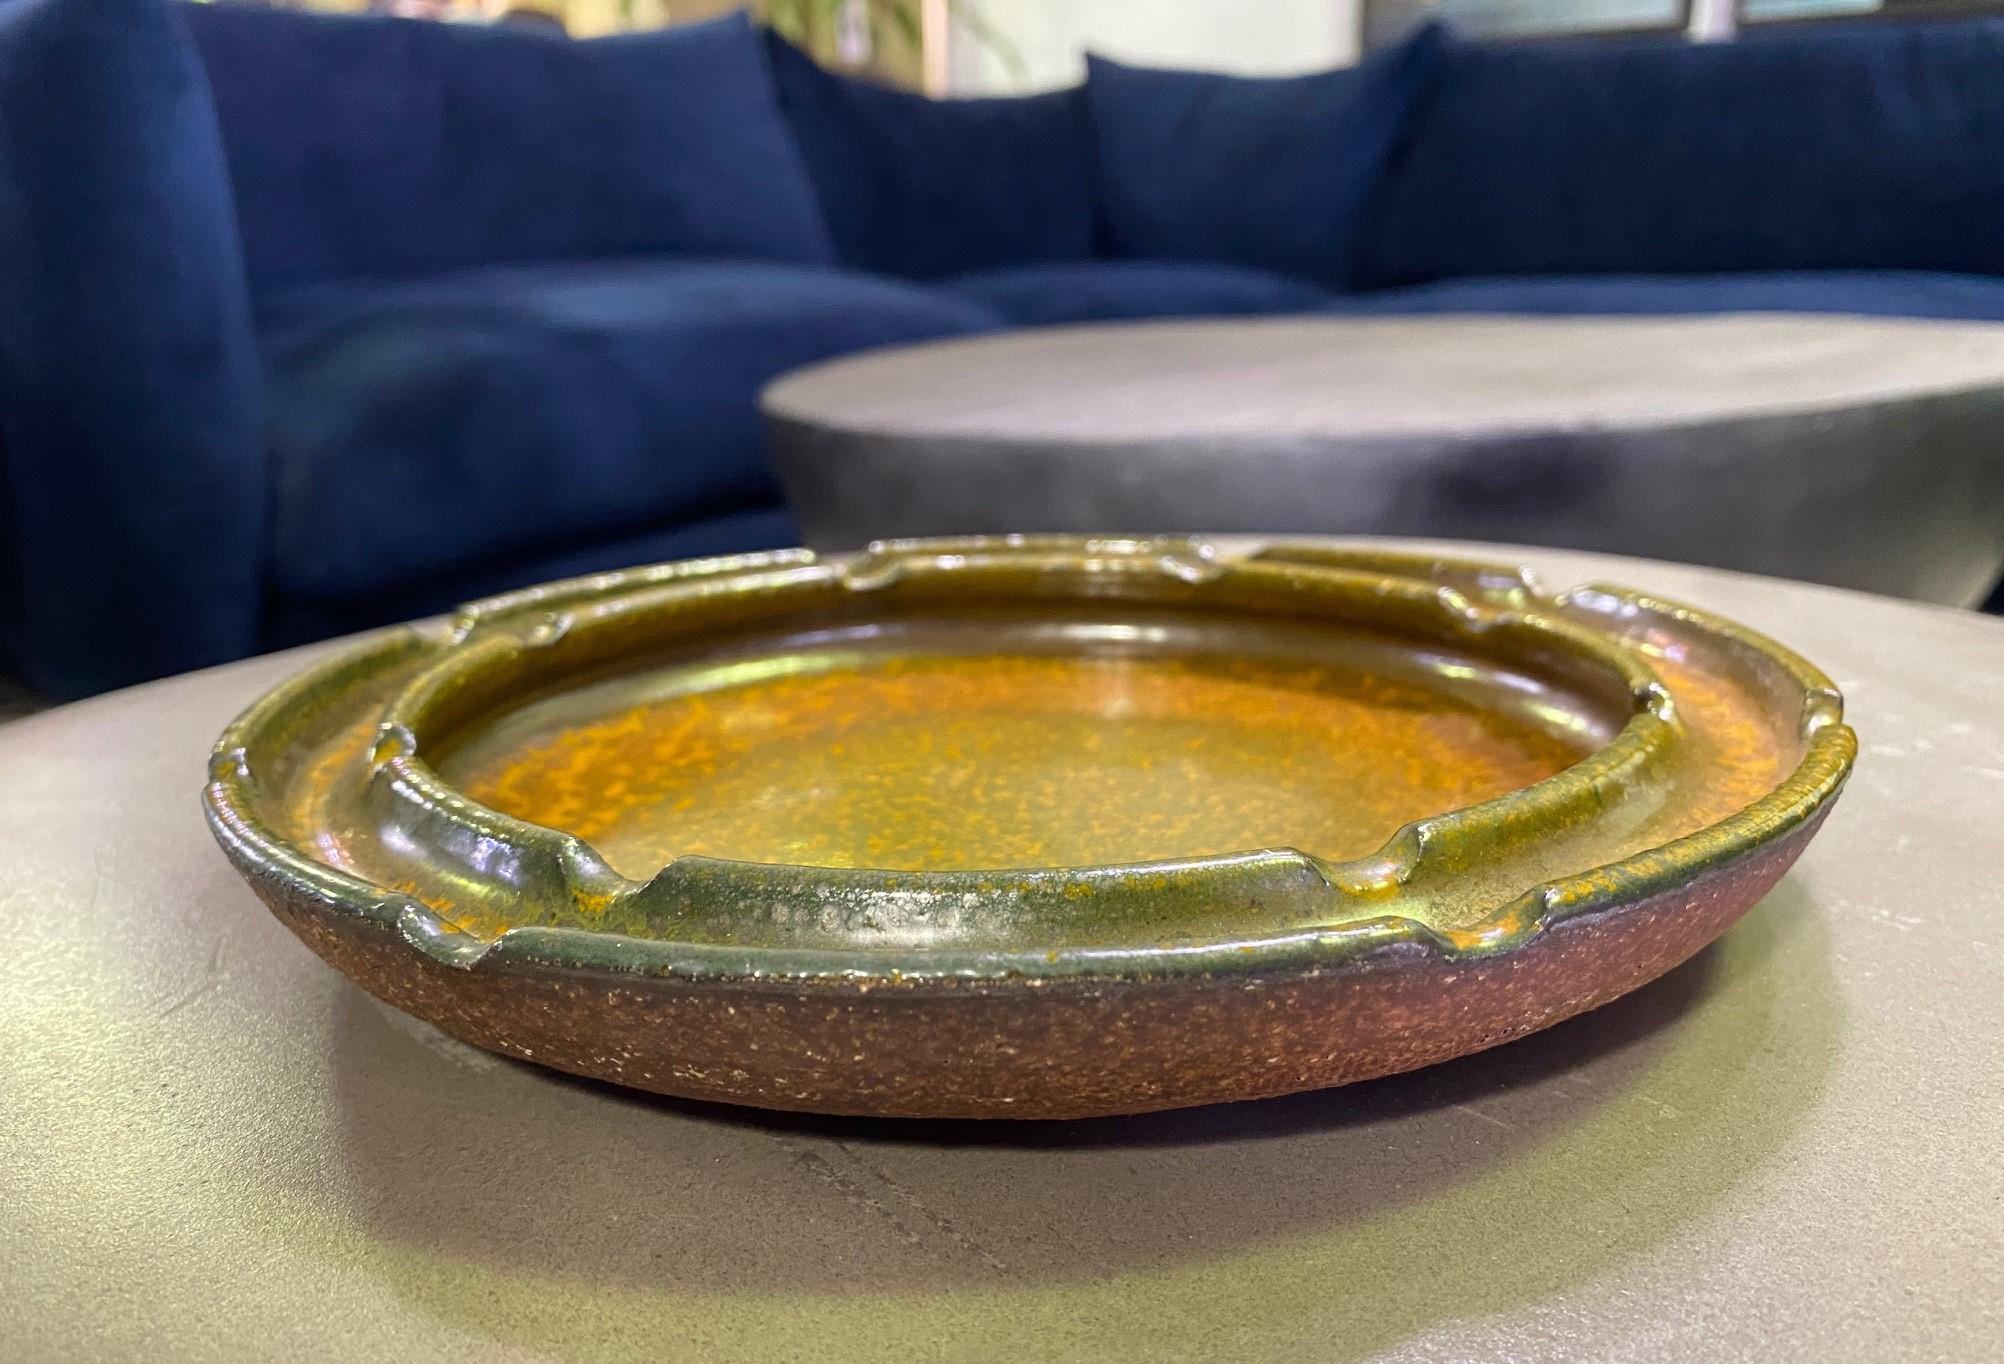 American Raul Coronel Signed Mid-Century Modern Ceramic California Pottery Bowl, 1960s For Sale